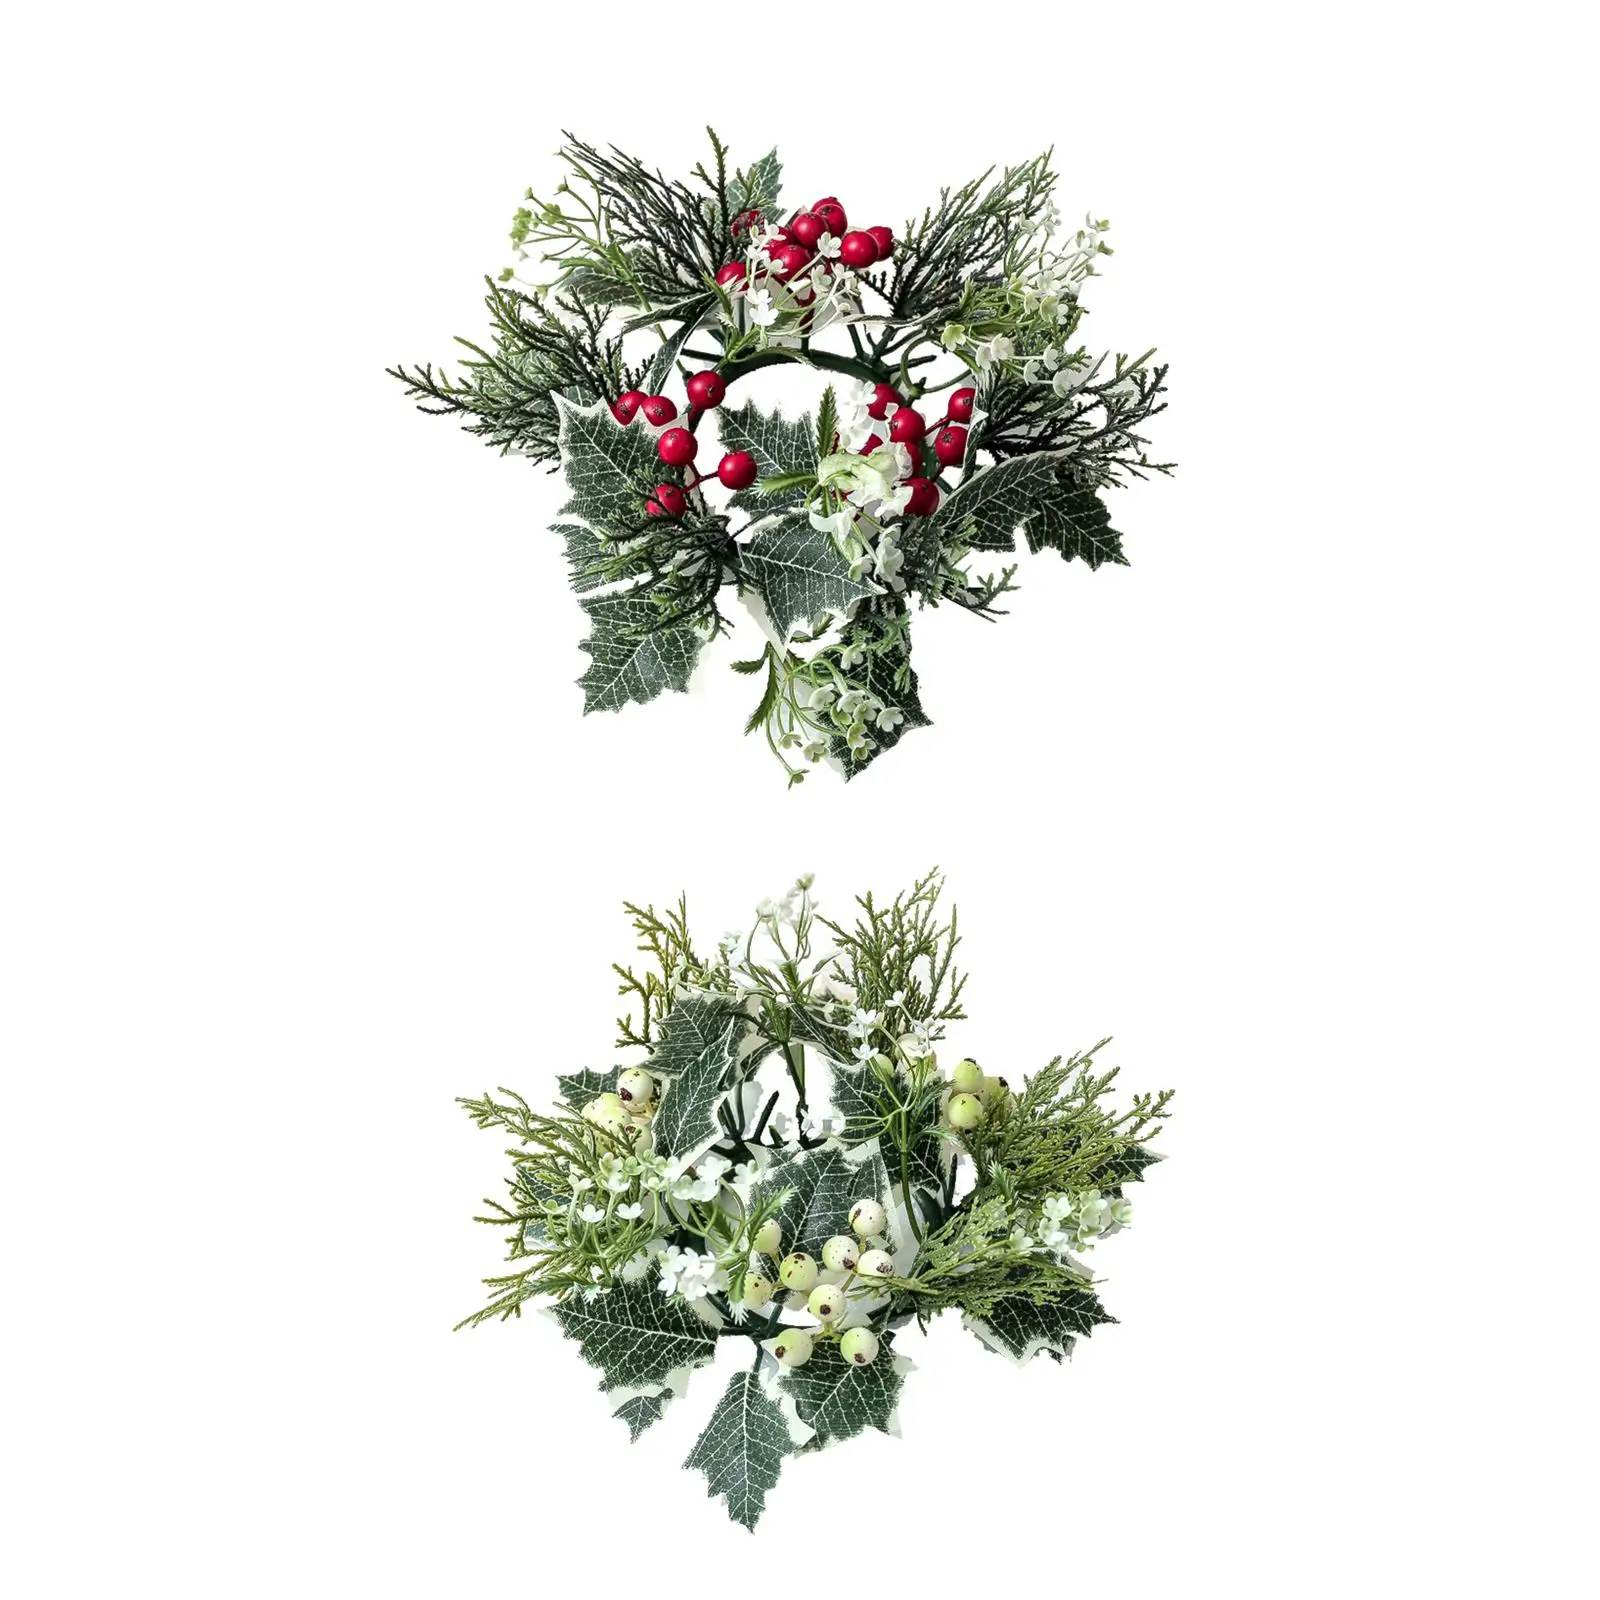 20cm Candle Rings Wreath Table Centerpiece Greenery Candleholders Wreaths for Wedding, Easter, Festivals, Party, Decoration